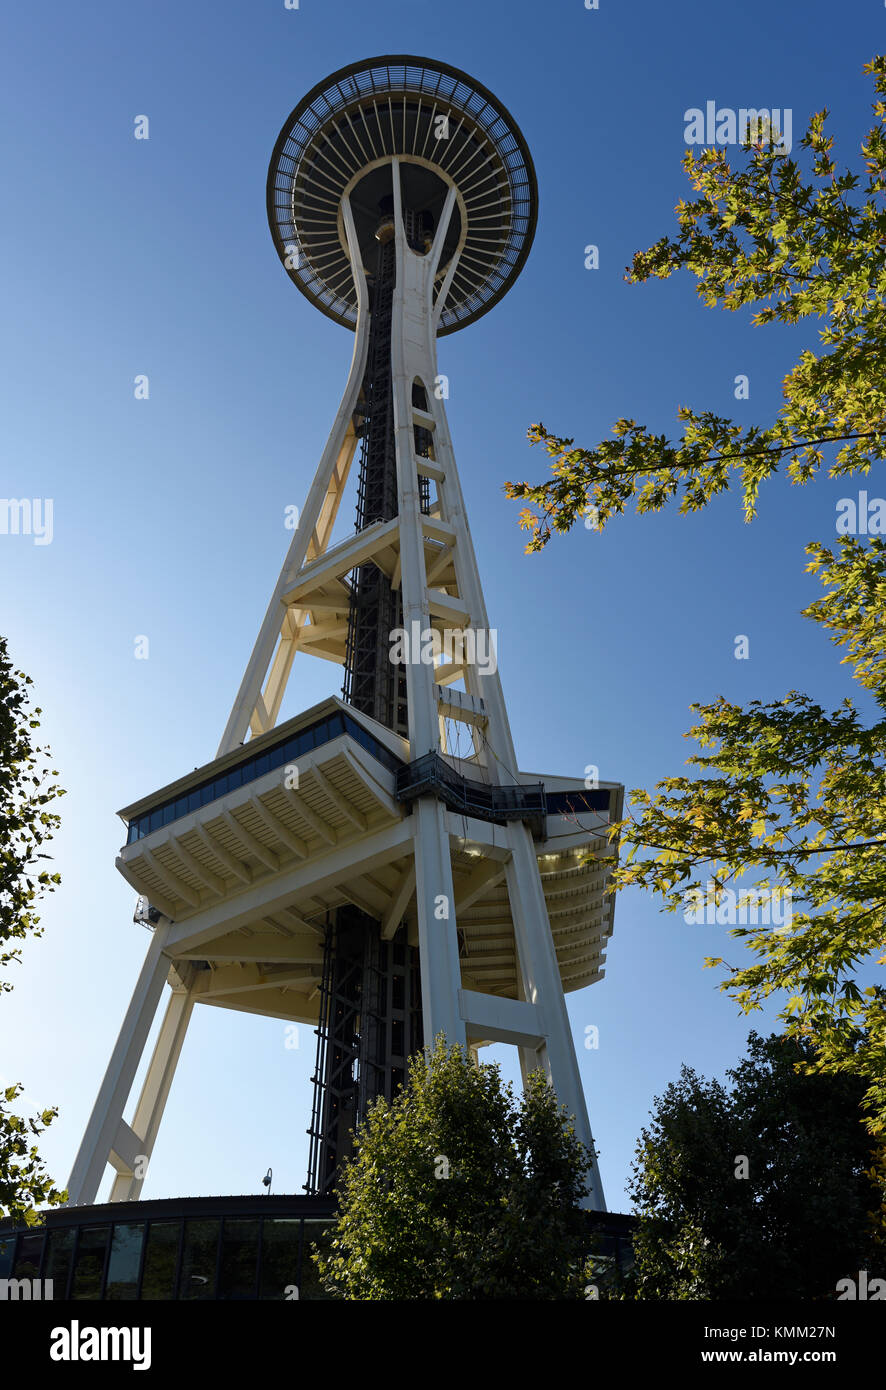 The Seattle Space Needle Observation Tower, Washington State, USA Stock Photo